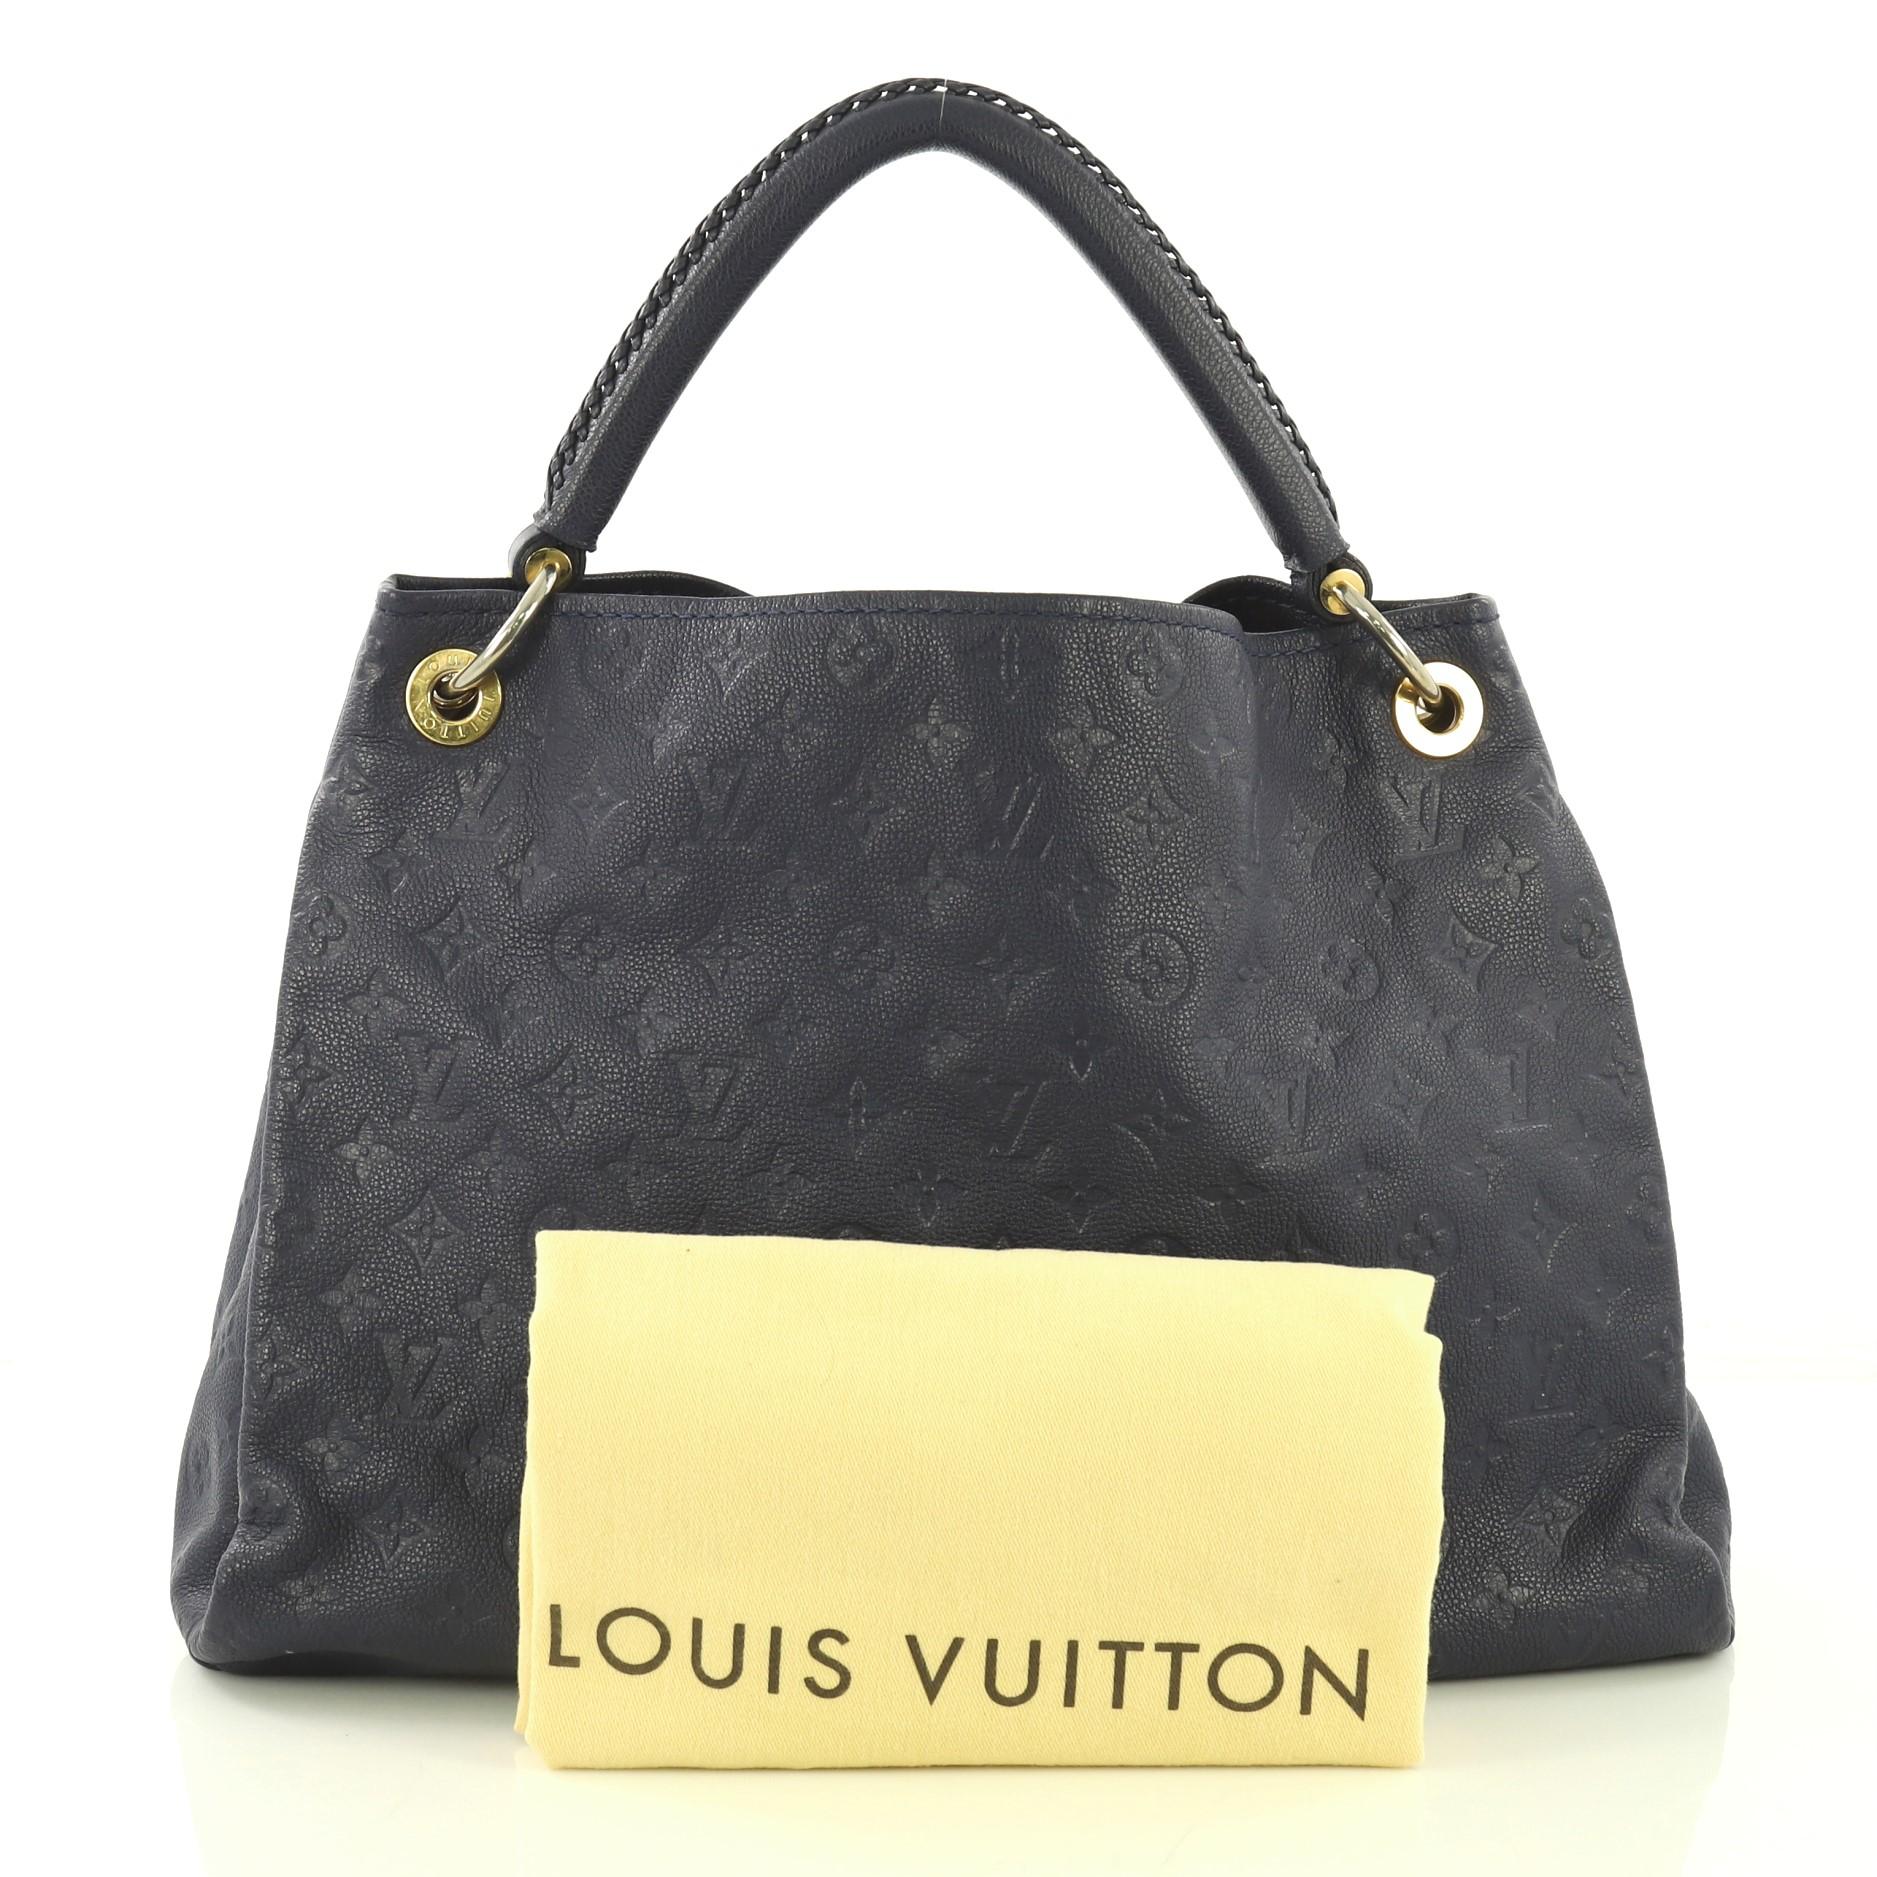 This Louis Vuitton Artsy Handbag Monogram Empreinte Leather MM, crafted from navy blue monogram empreinte leather, features a single looped braided top handle, protective base studs, and gold-tone hardware. Its wide open top showcases a navy blue